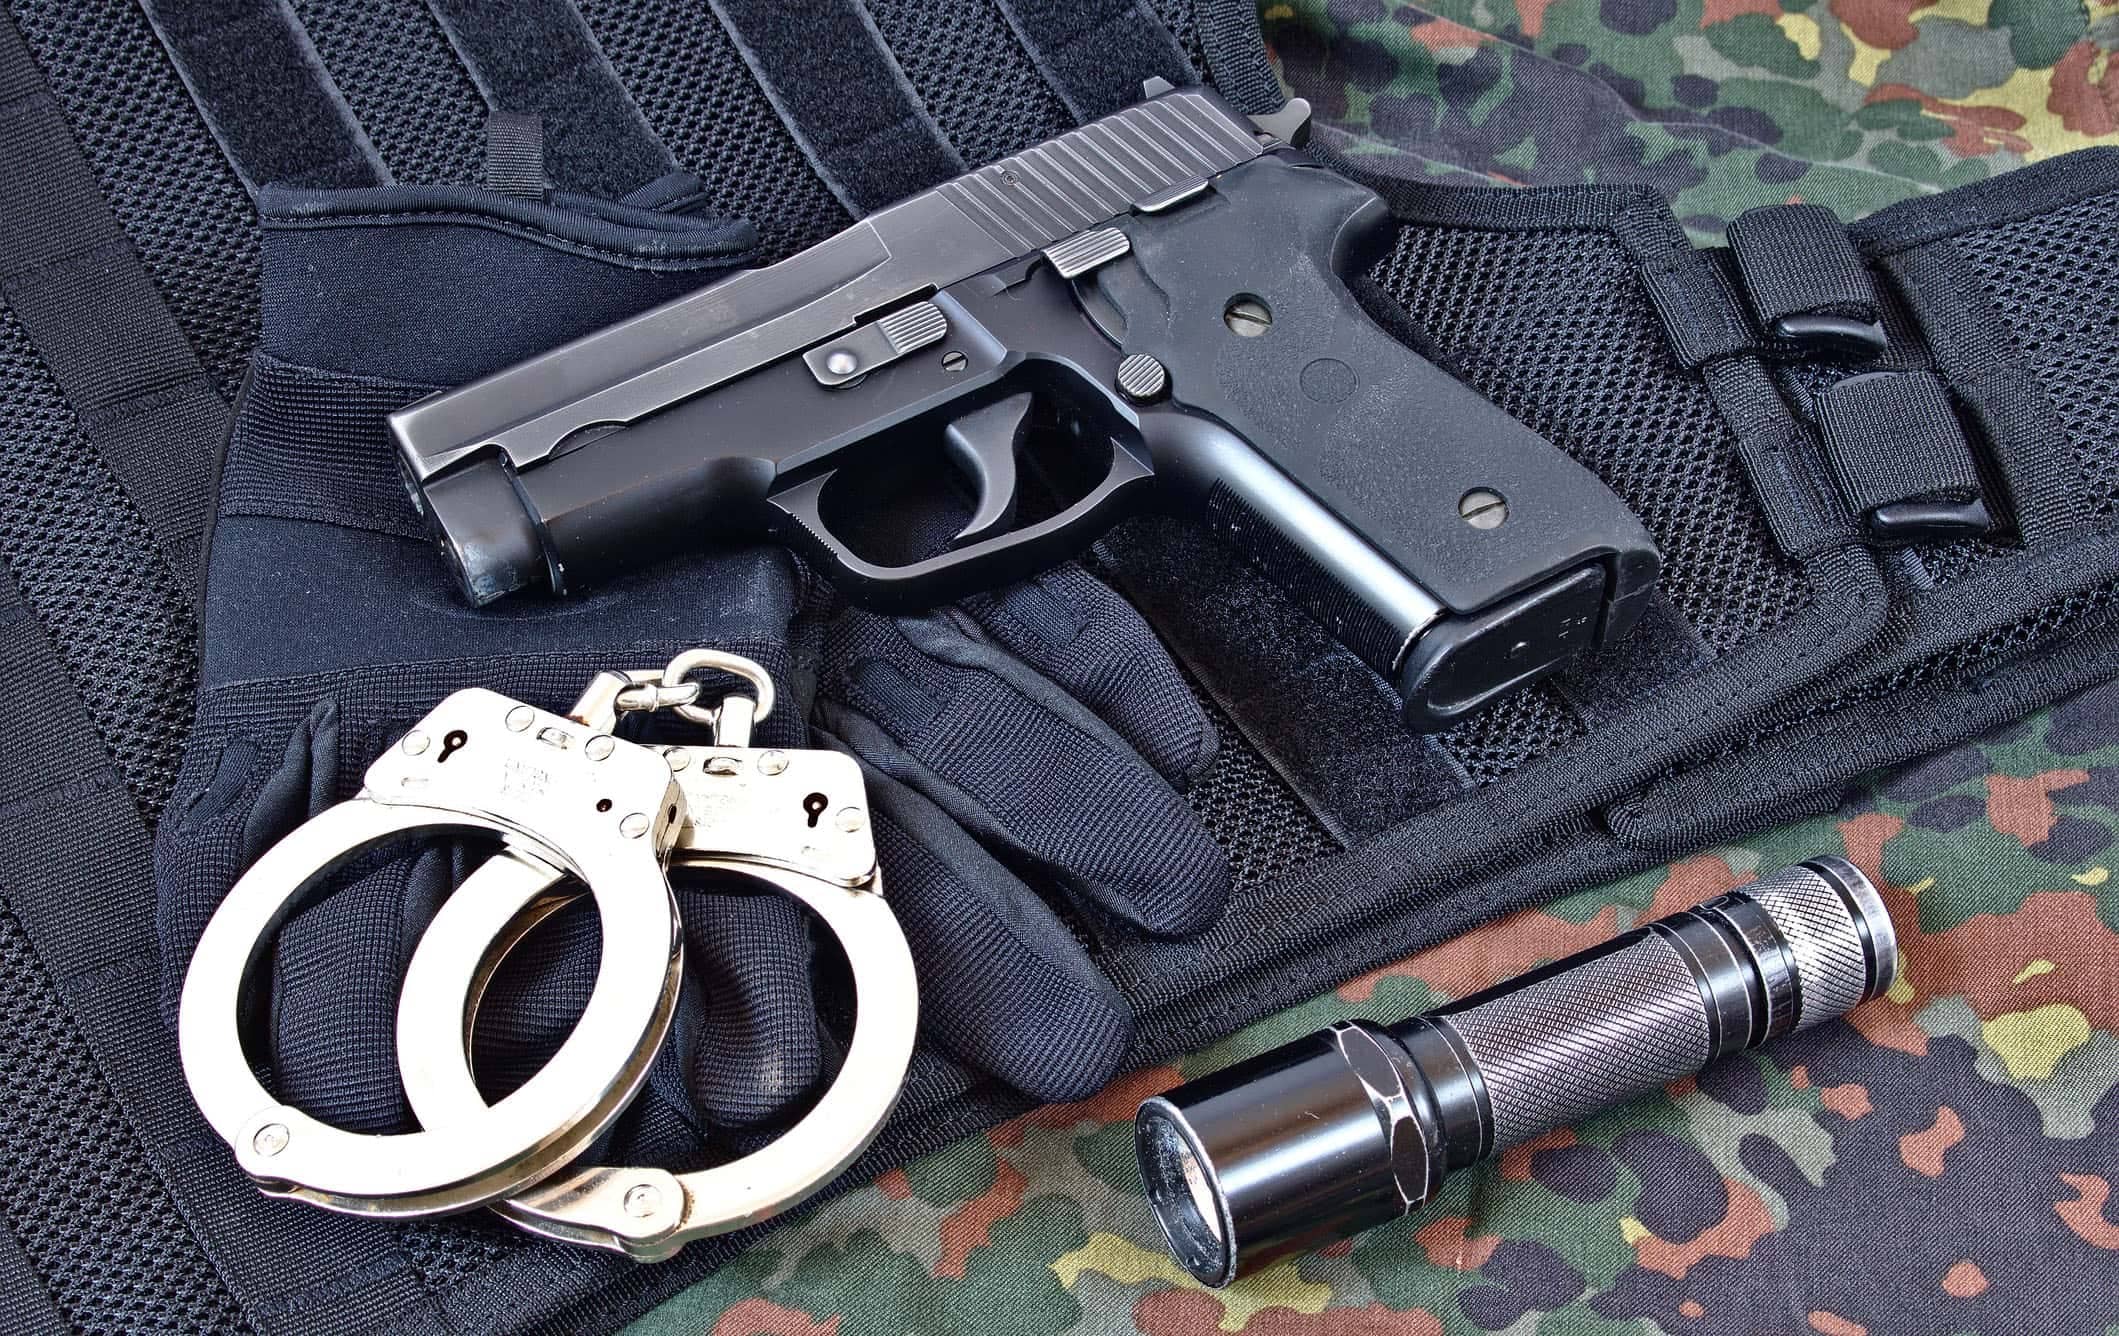 handgun-with-handcuffs-gloves-and-flashlight-on-tactical-vest-a-3